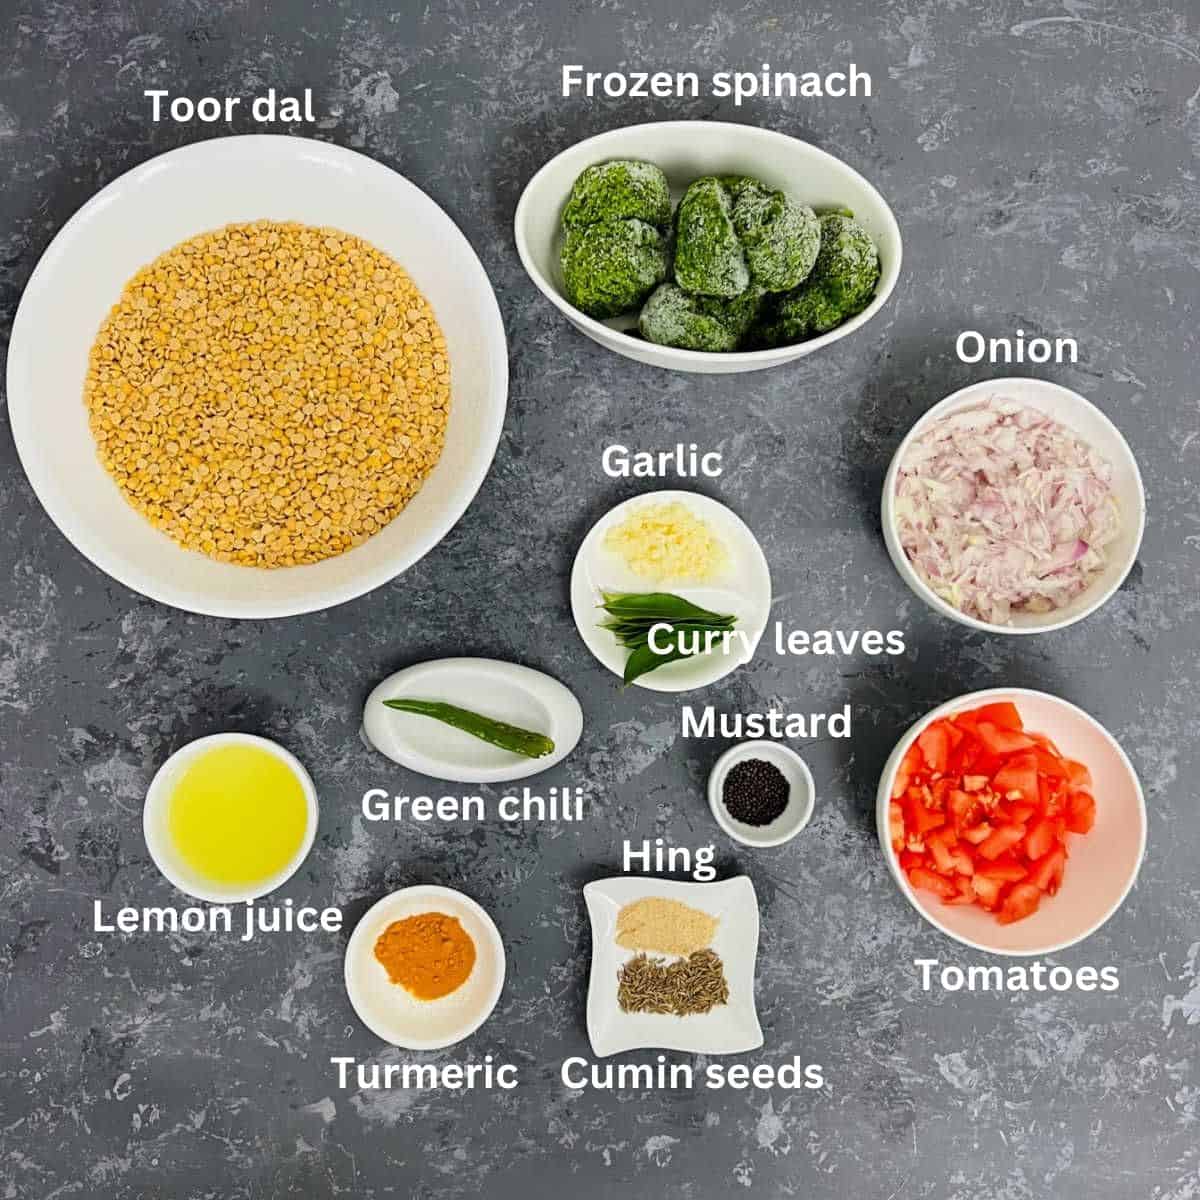 dal palak ingredients with labels.